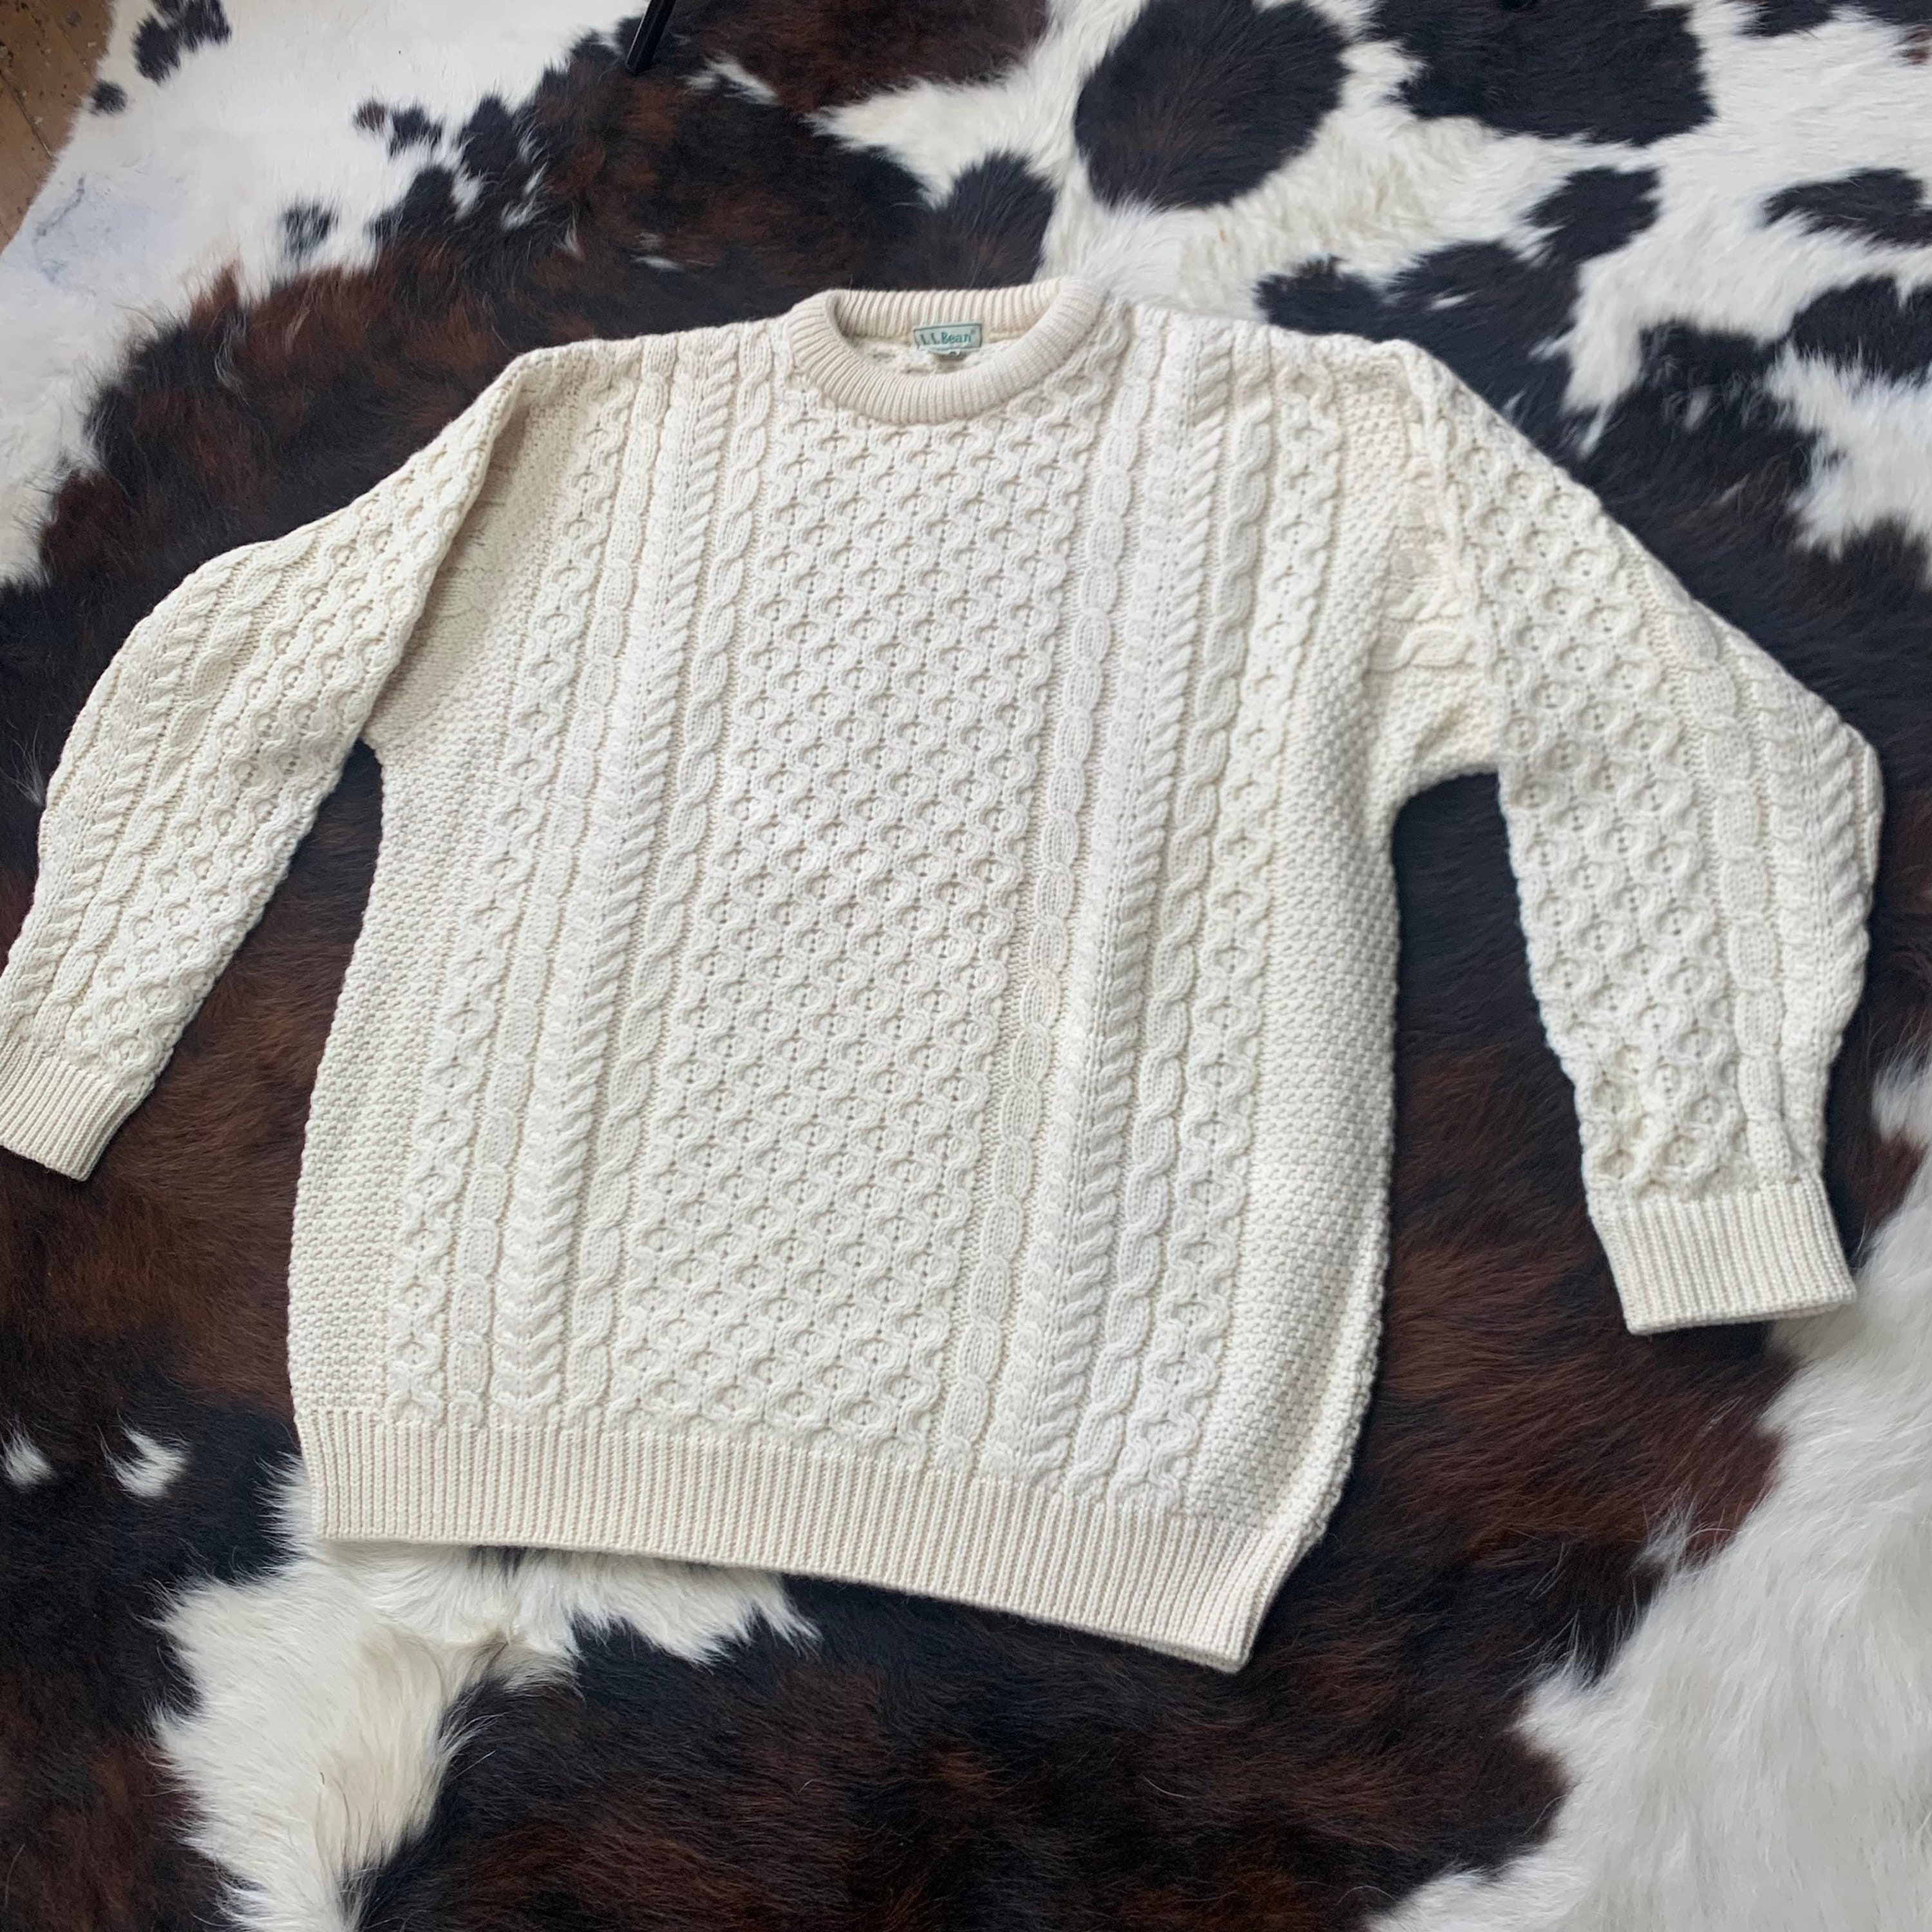 90s Cable Sweater - Etsy